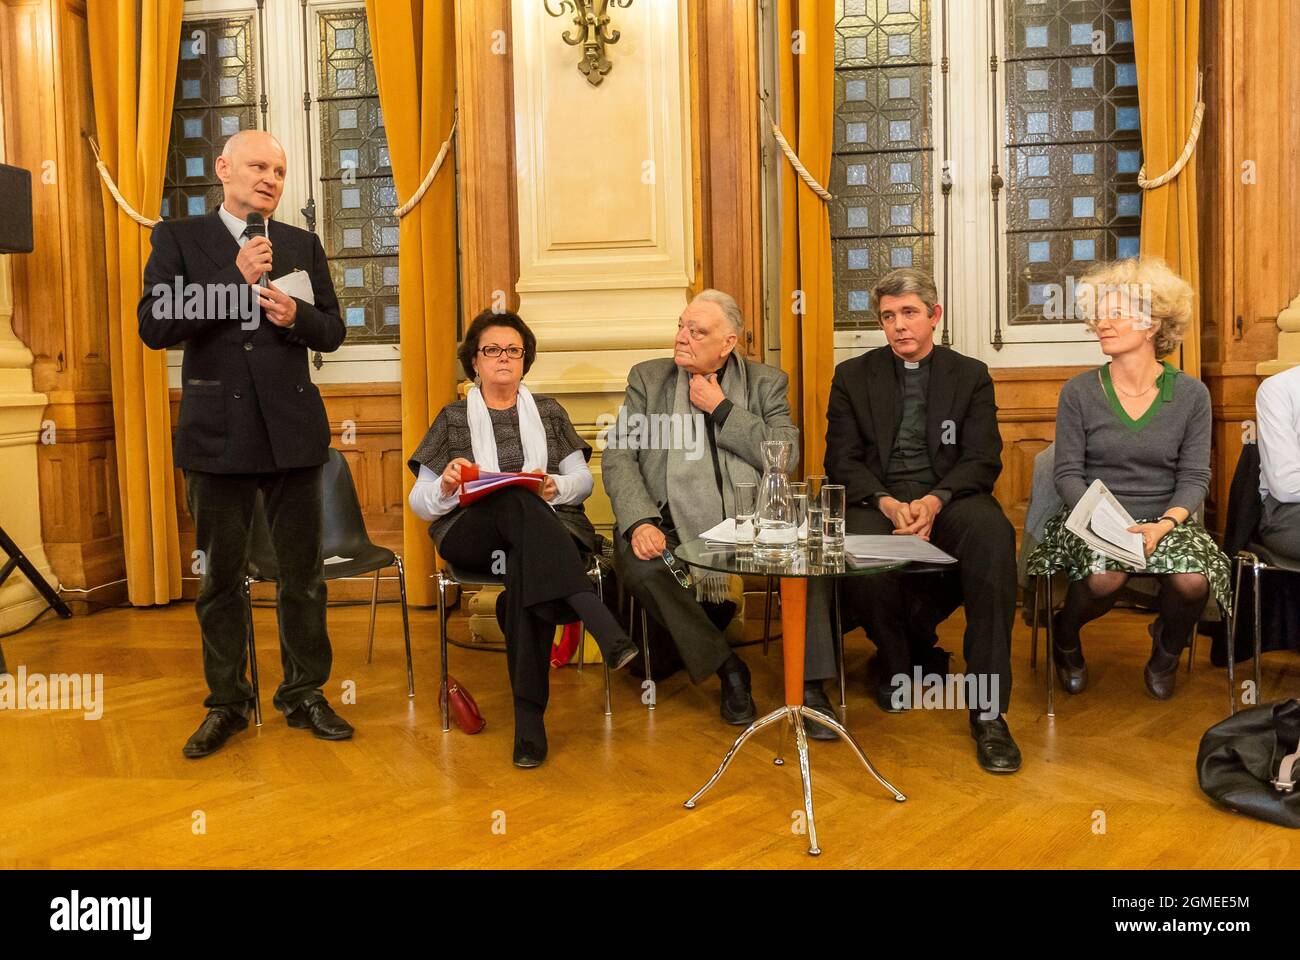 Paris, France, Christine Boutin, French Conservative politician and Homophobe, during Anti-Gay Marriage Press Debate, Mairie du 4e, Christophe Girard, former adjoint Mayor meeting france, religion homosexuality Stock Photo